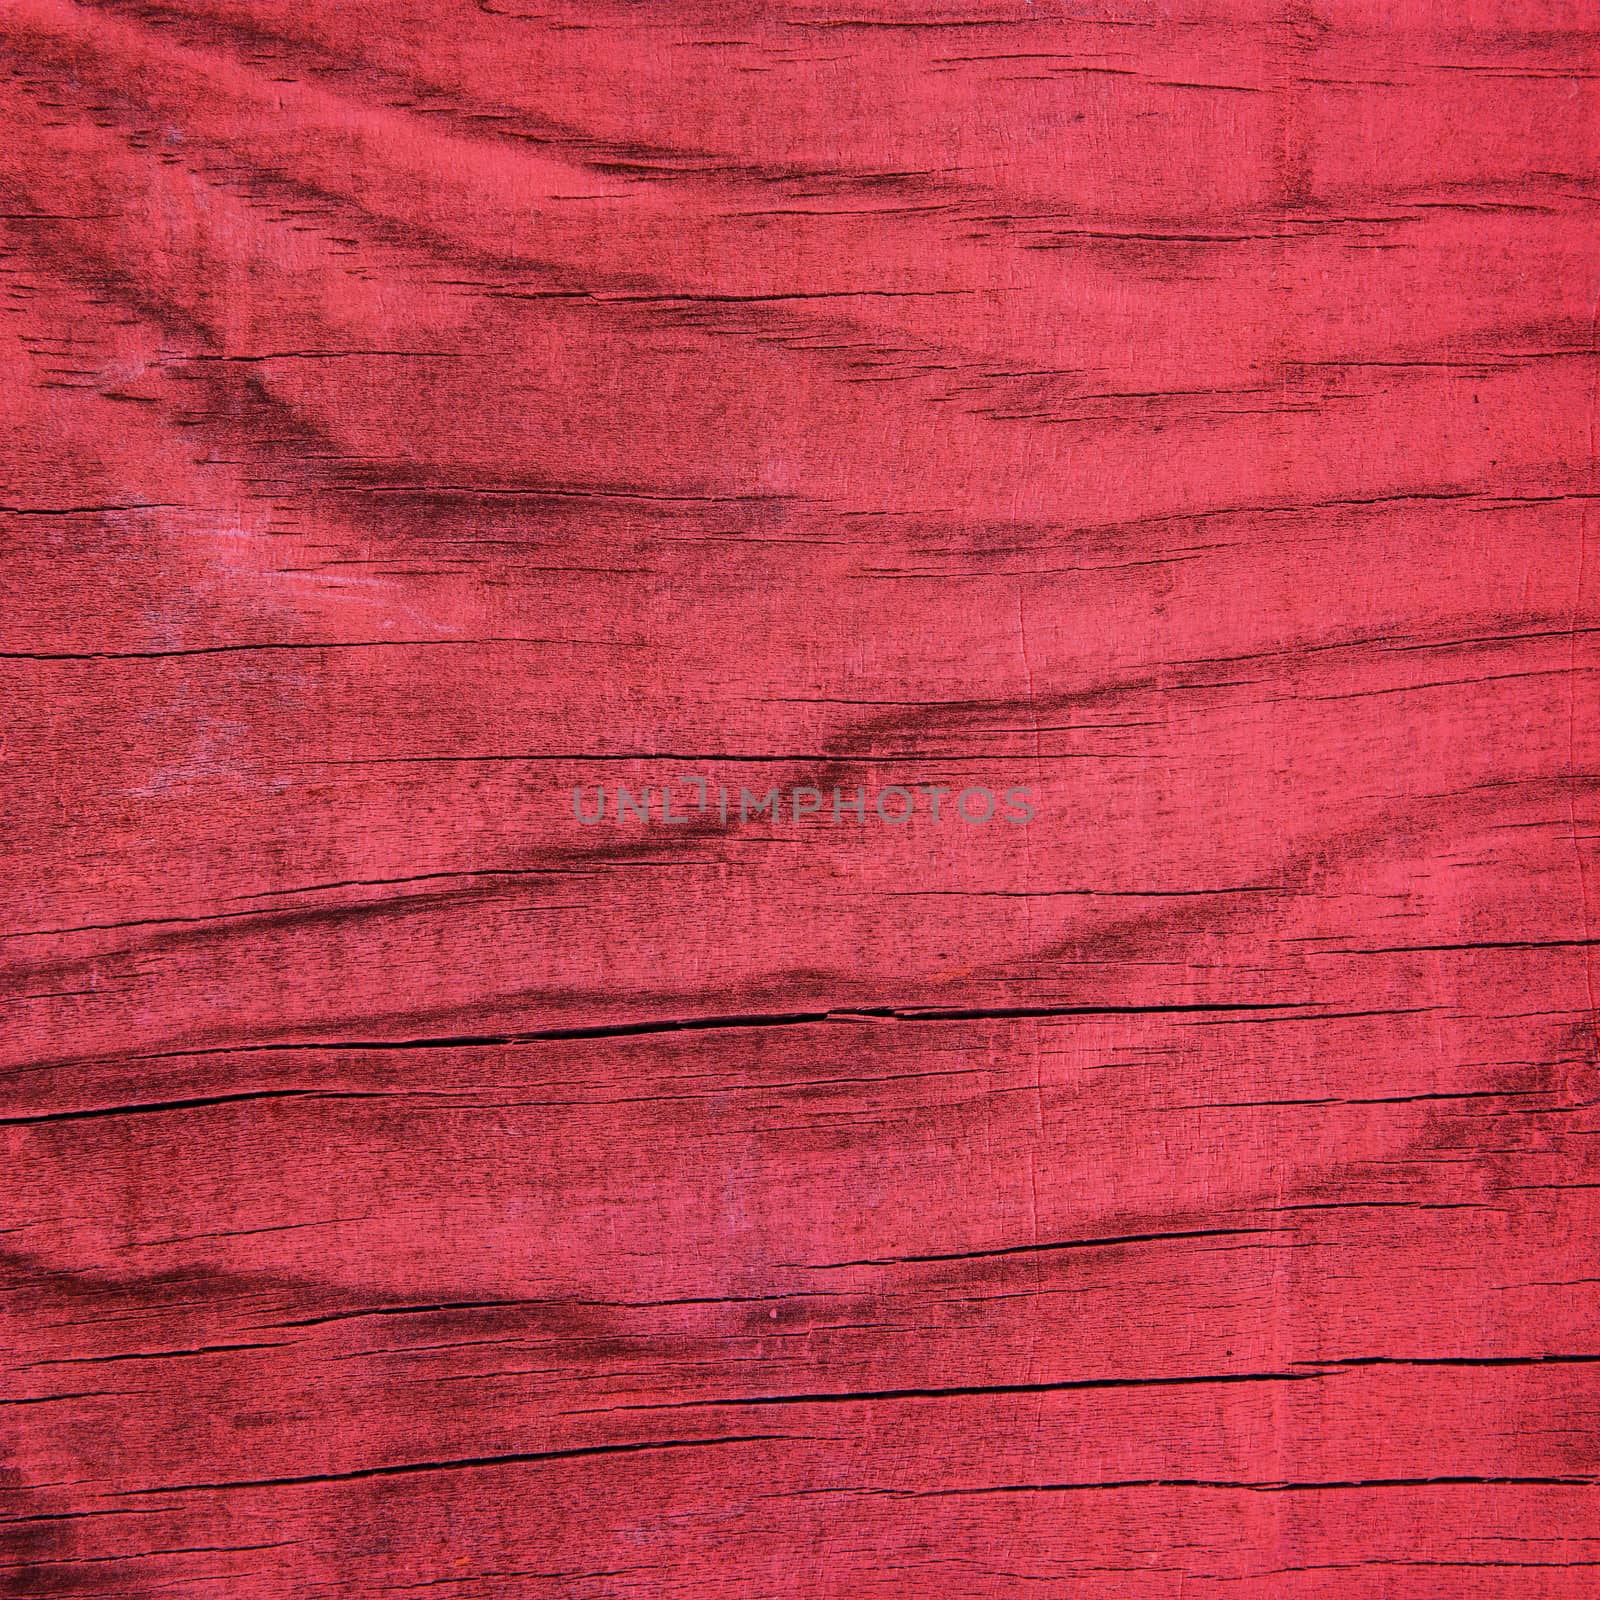 Grunge  red wood texture for background